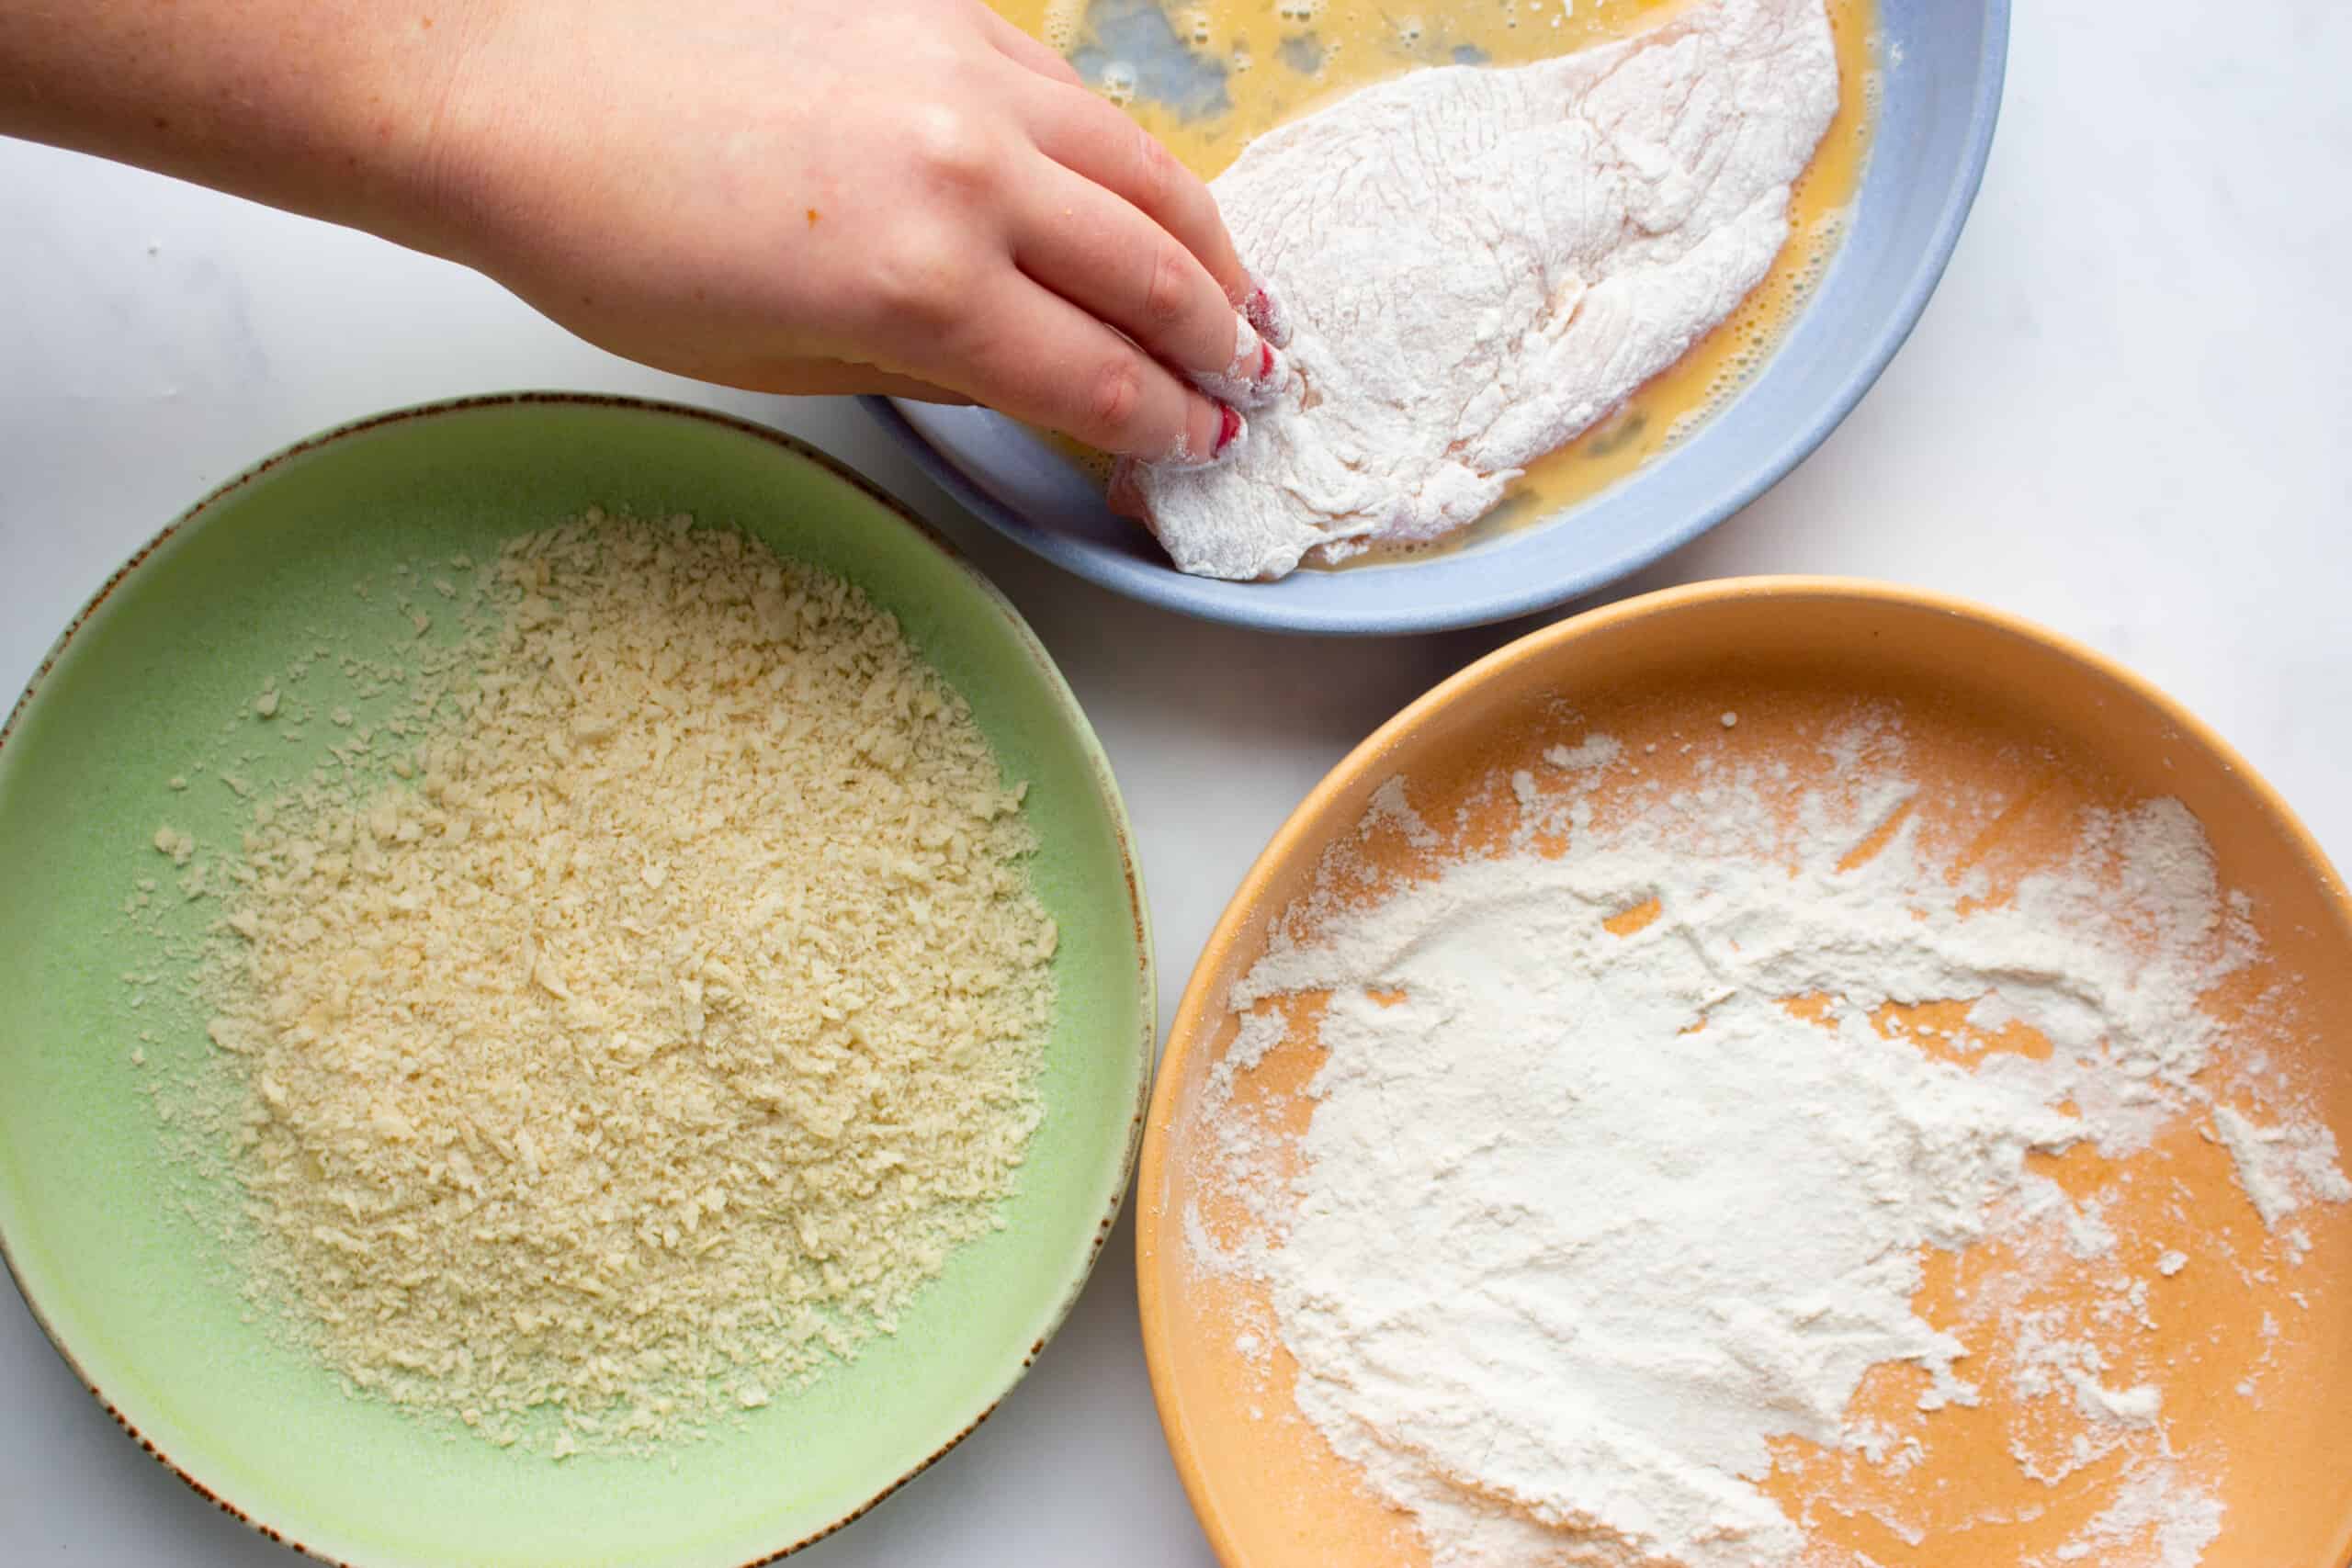 3 plates with flour, egg and bread crumbs